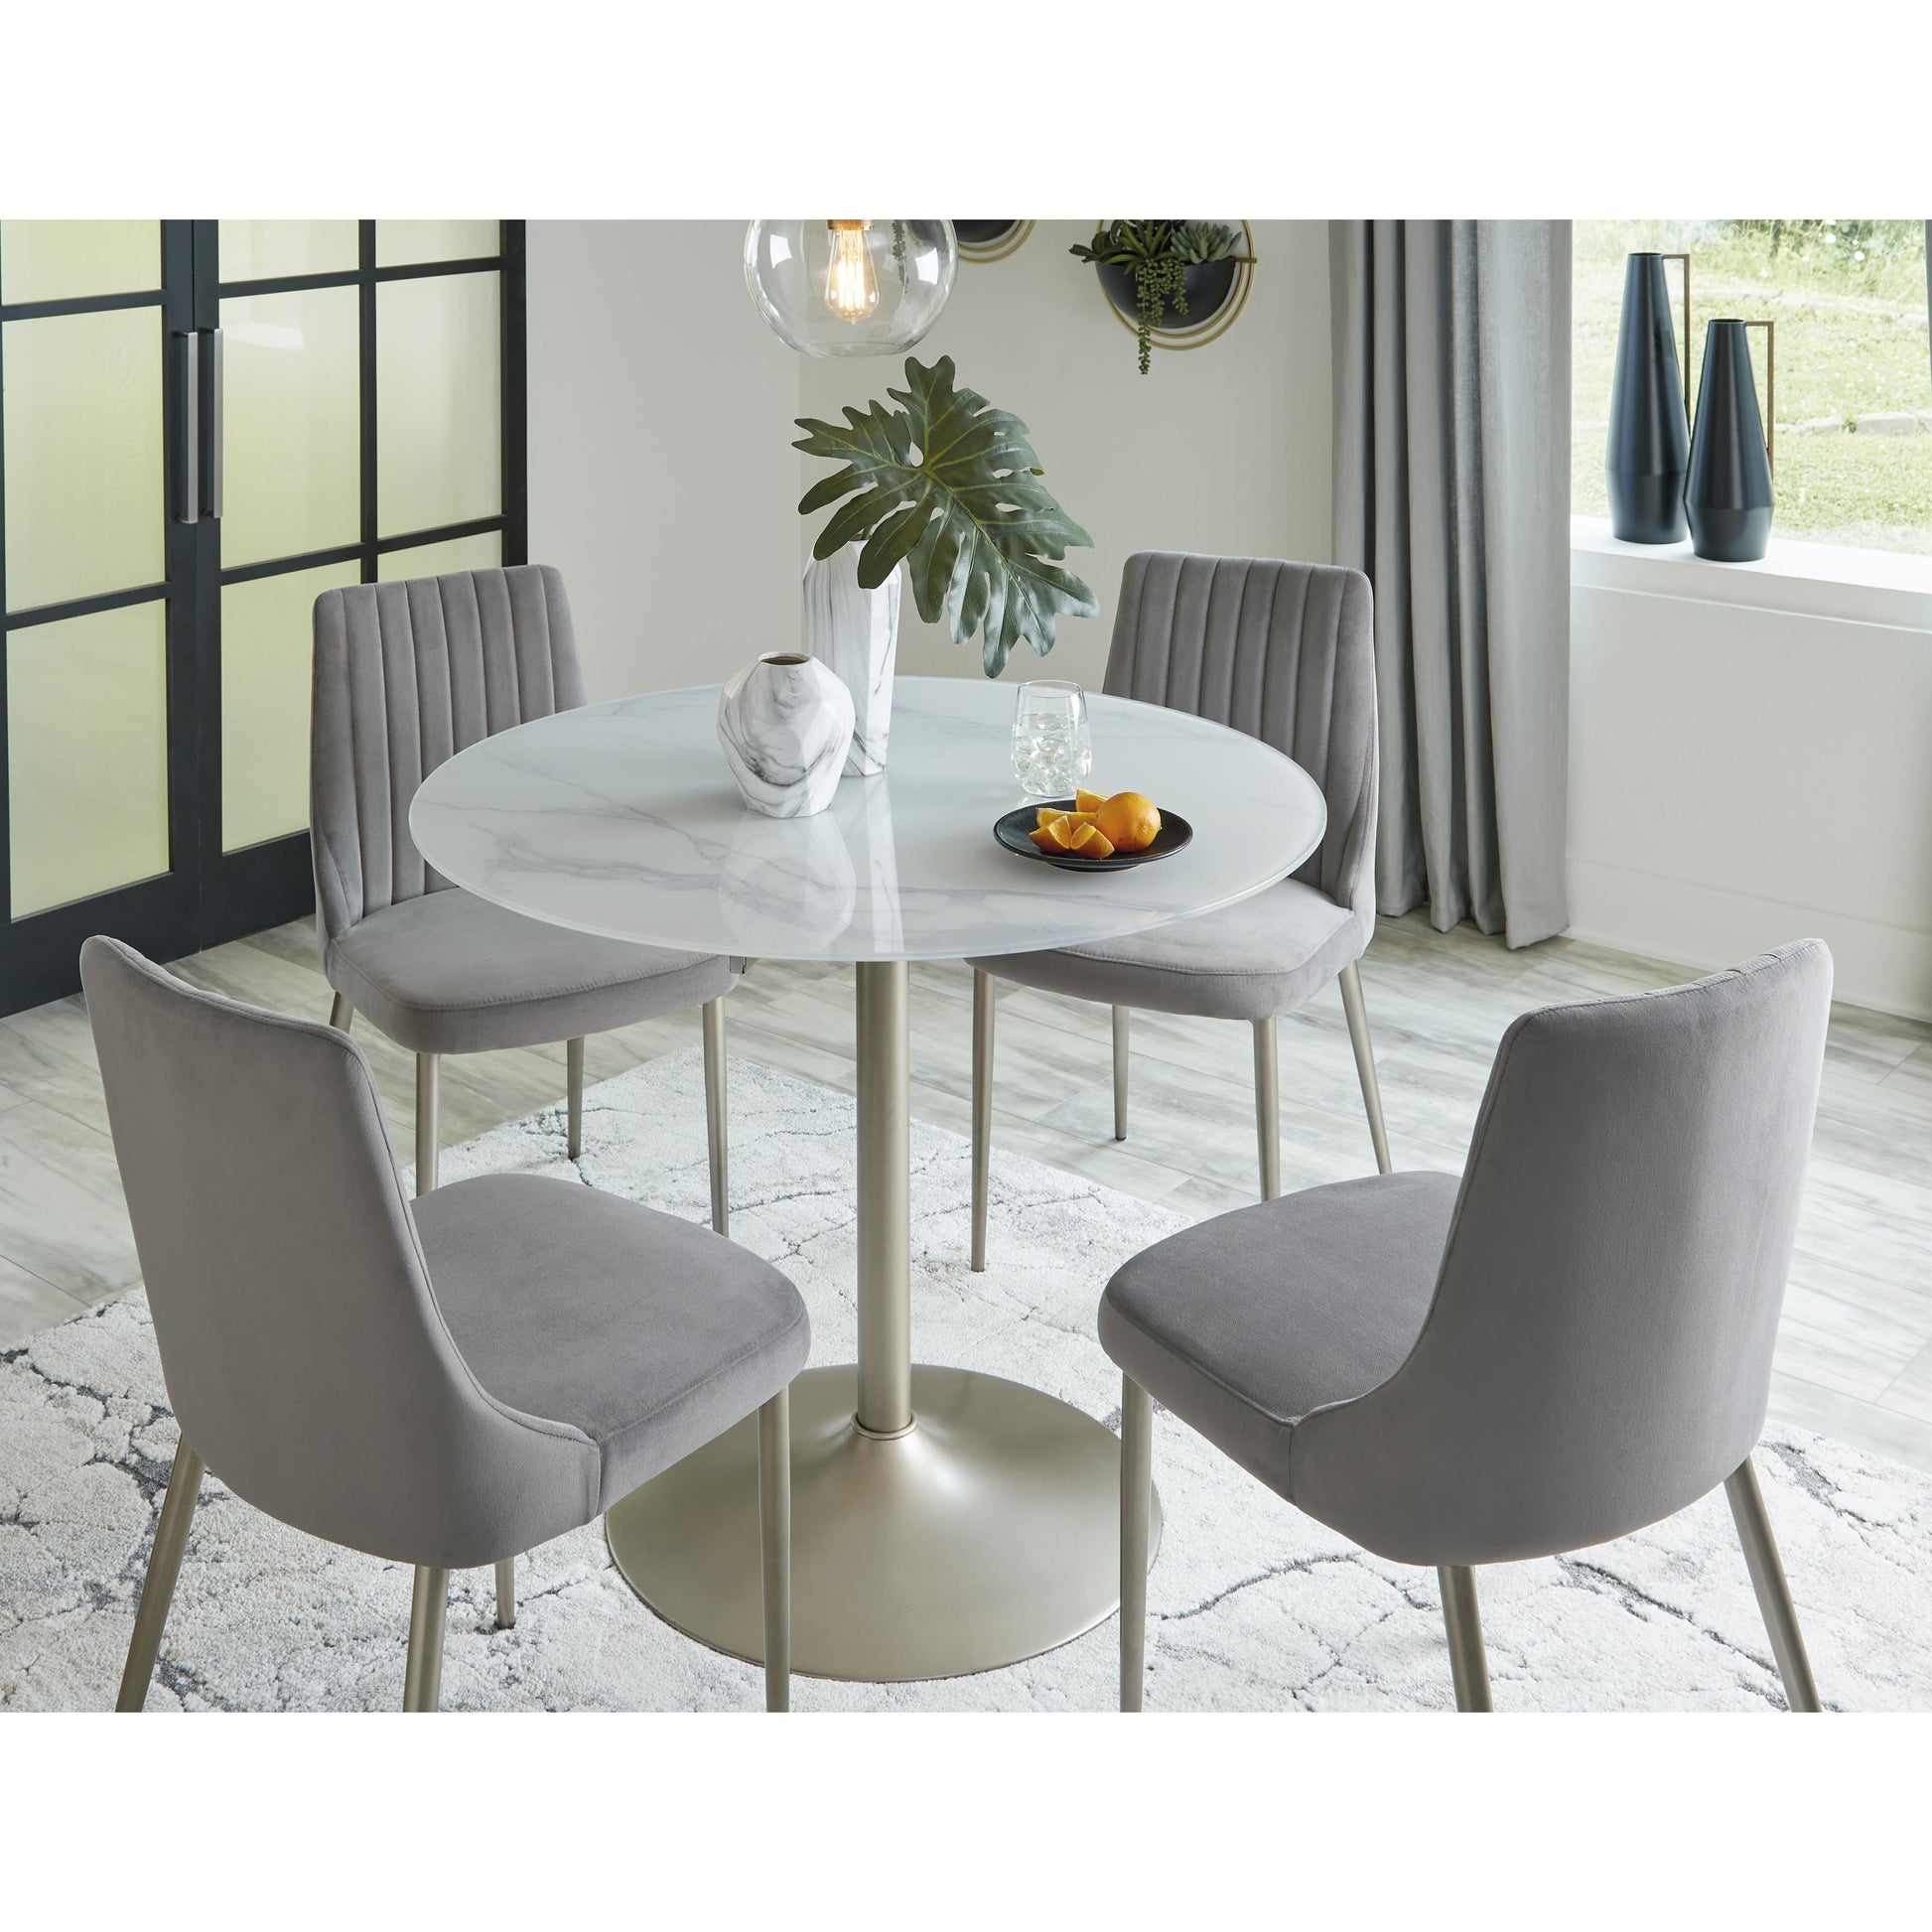 Signature Design by Ashley Round Barchoni Dining Table with Glass Top and Pedestal Base D262-15